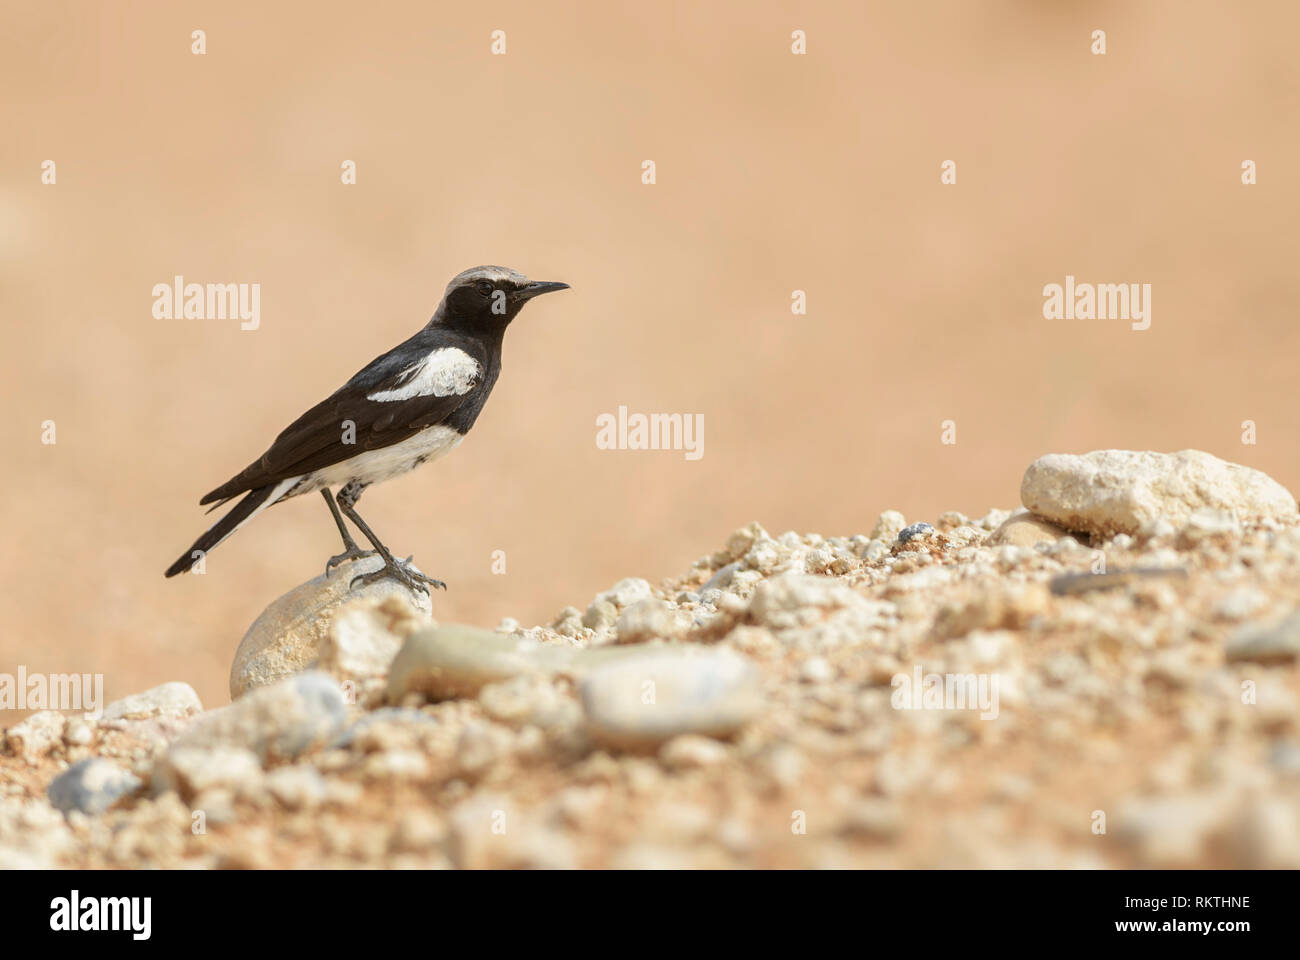 Mountain Chat - Myrmecocichla monticola, beautiful perching bird from southern African gardens and bushes, Sossusvlei, Namibia. Stock Photo